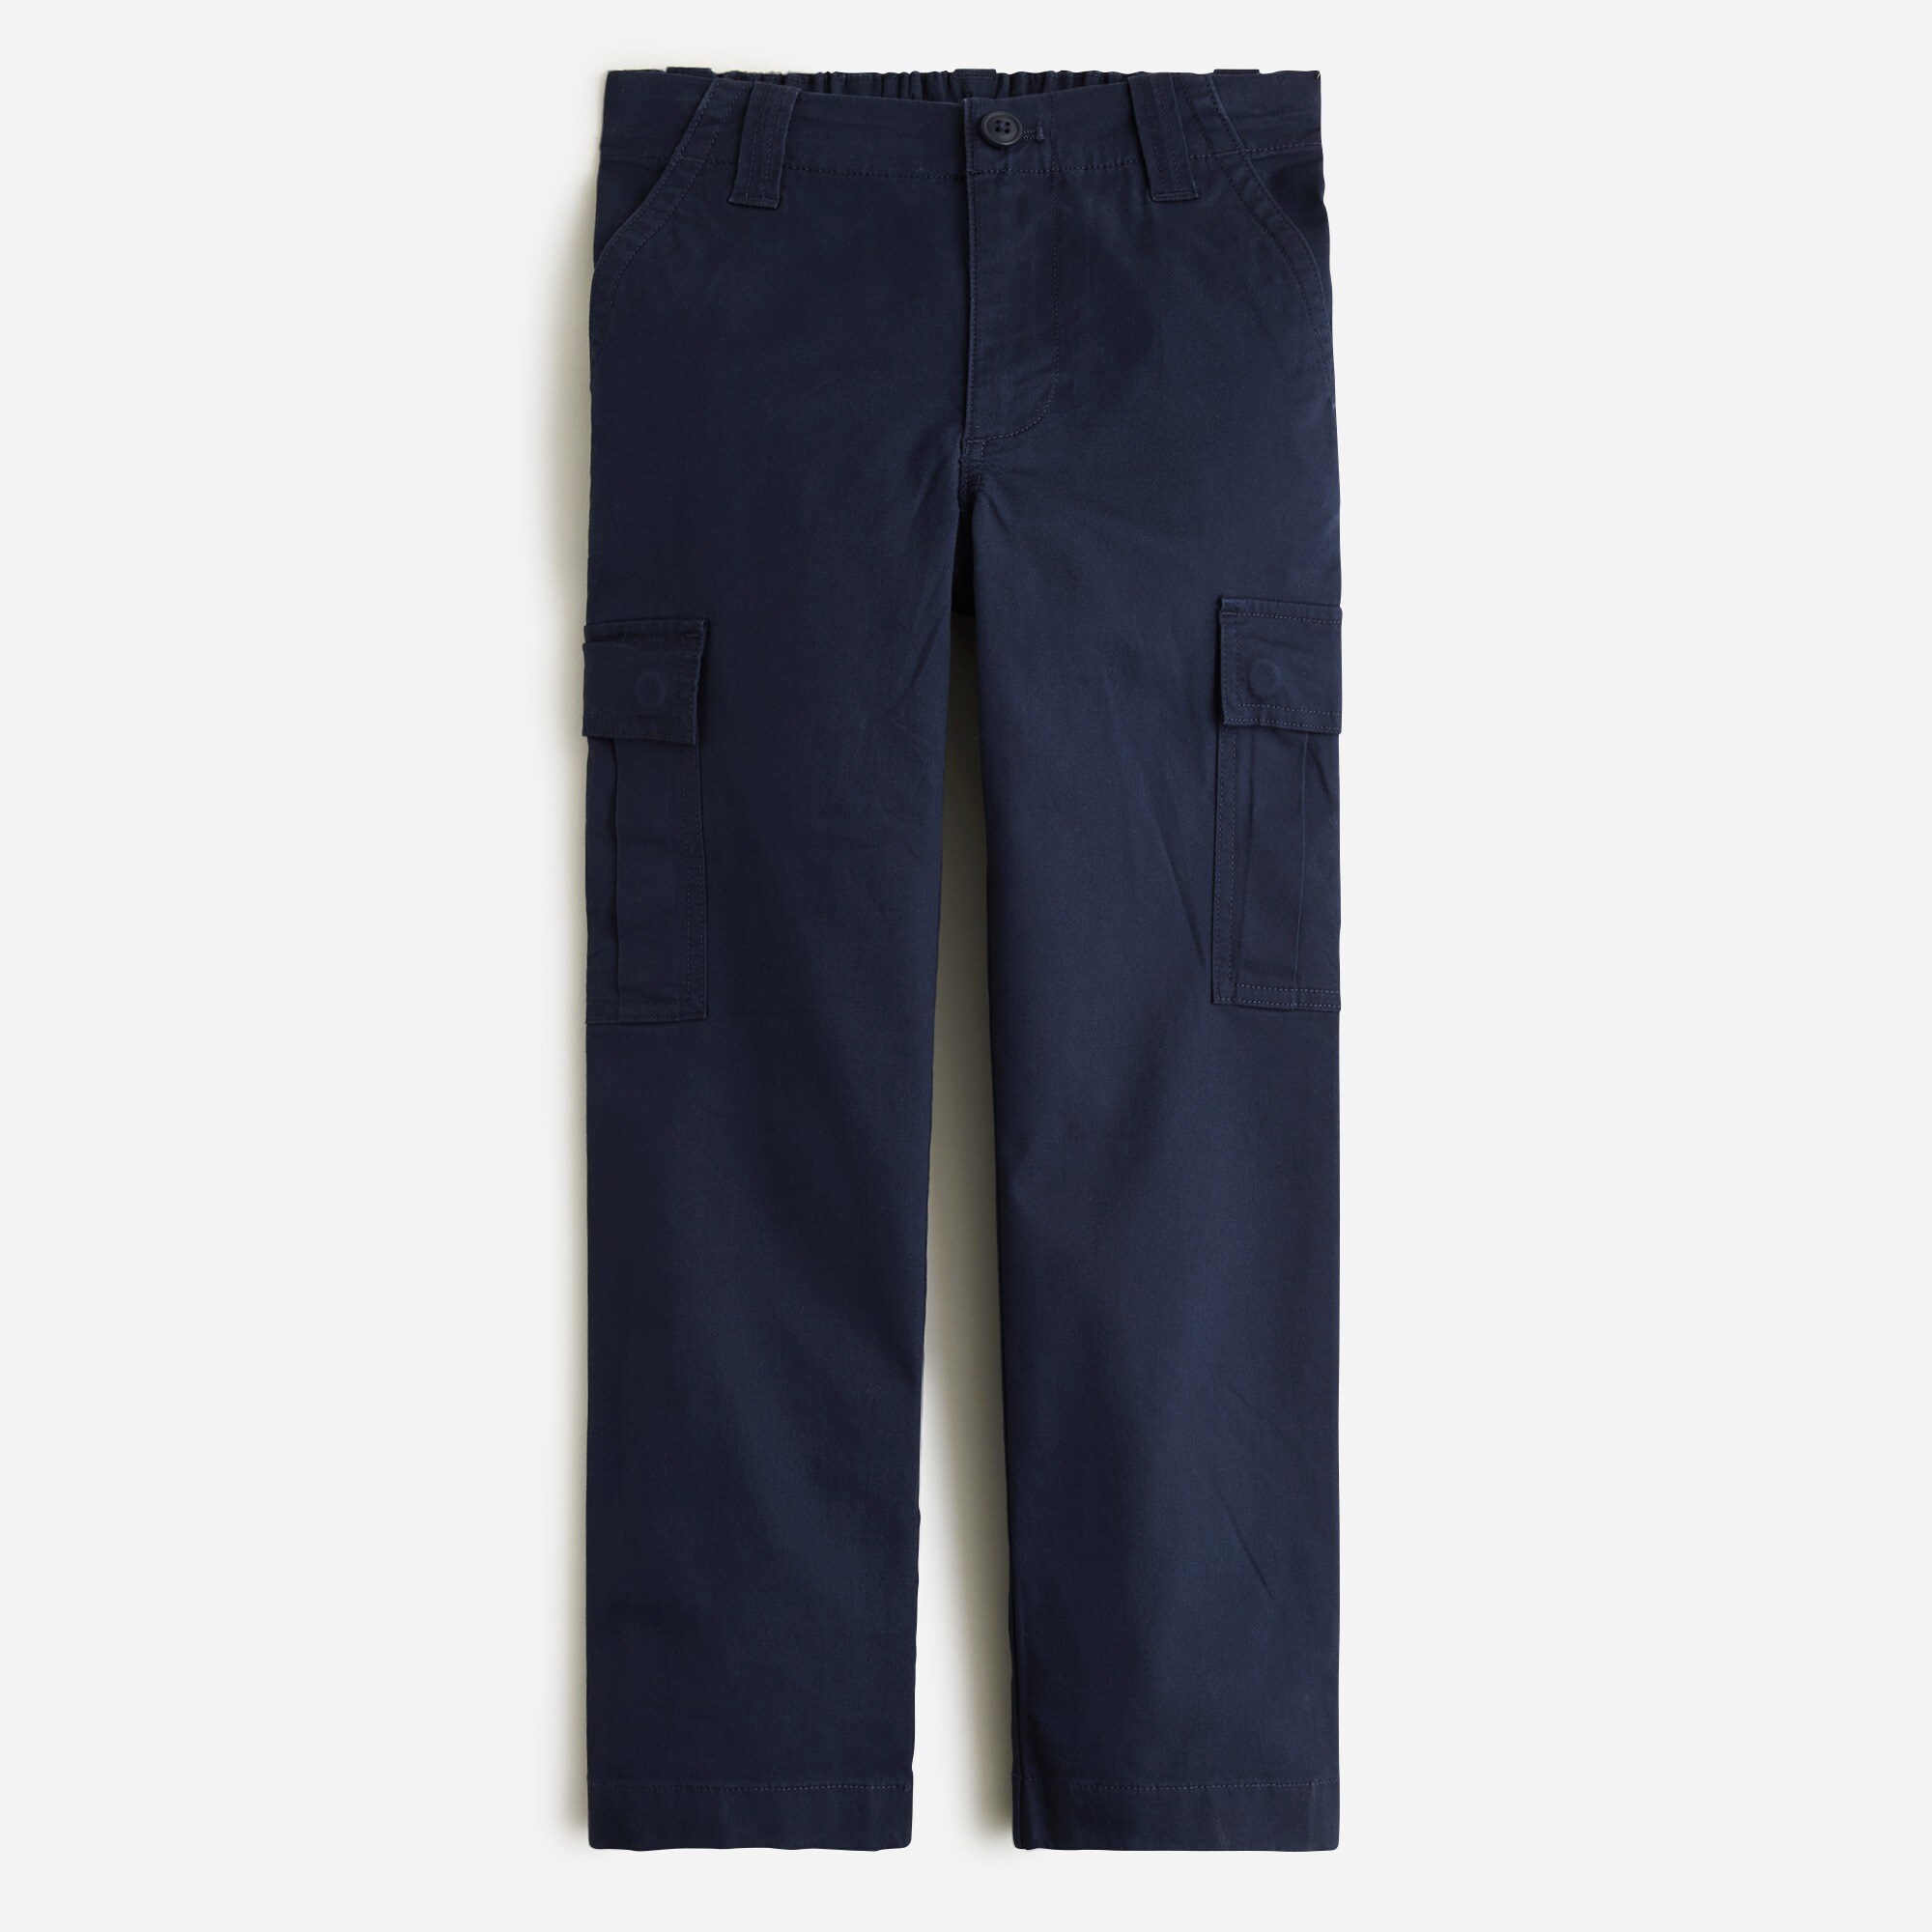  Kids' cargo pant in stretch twill